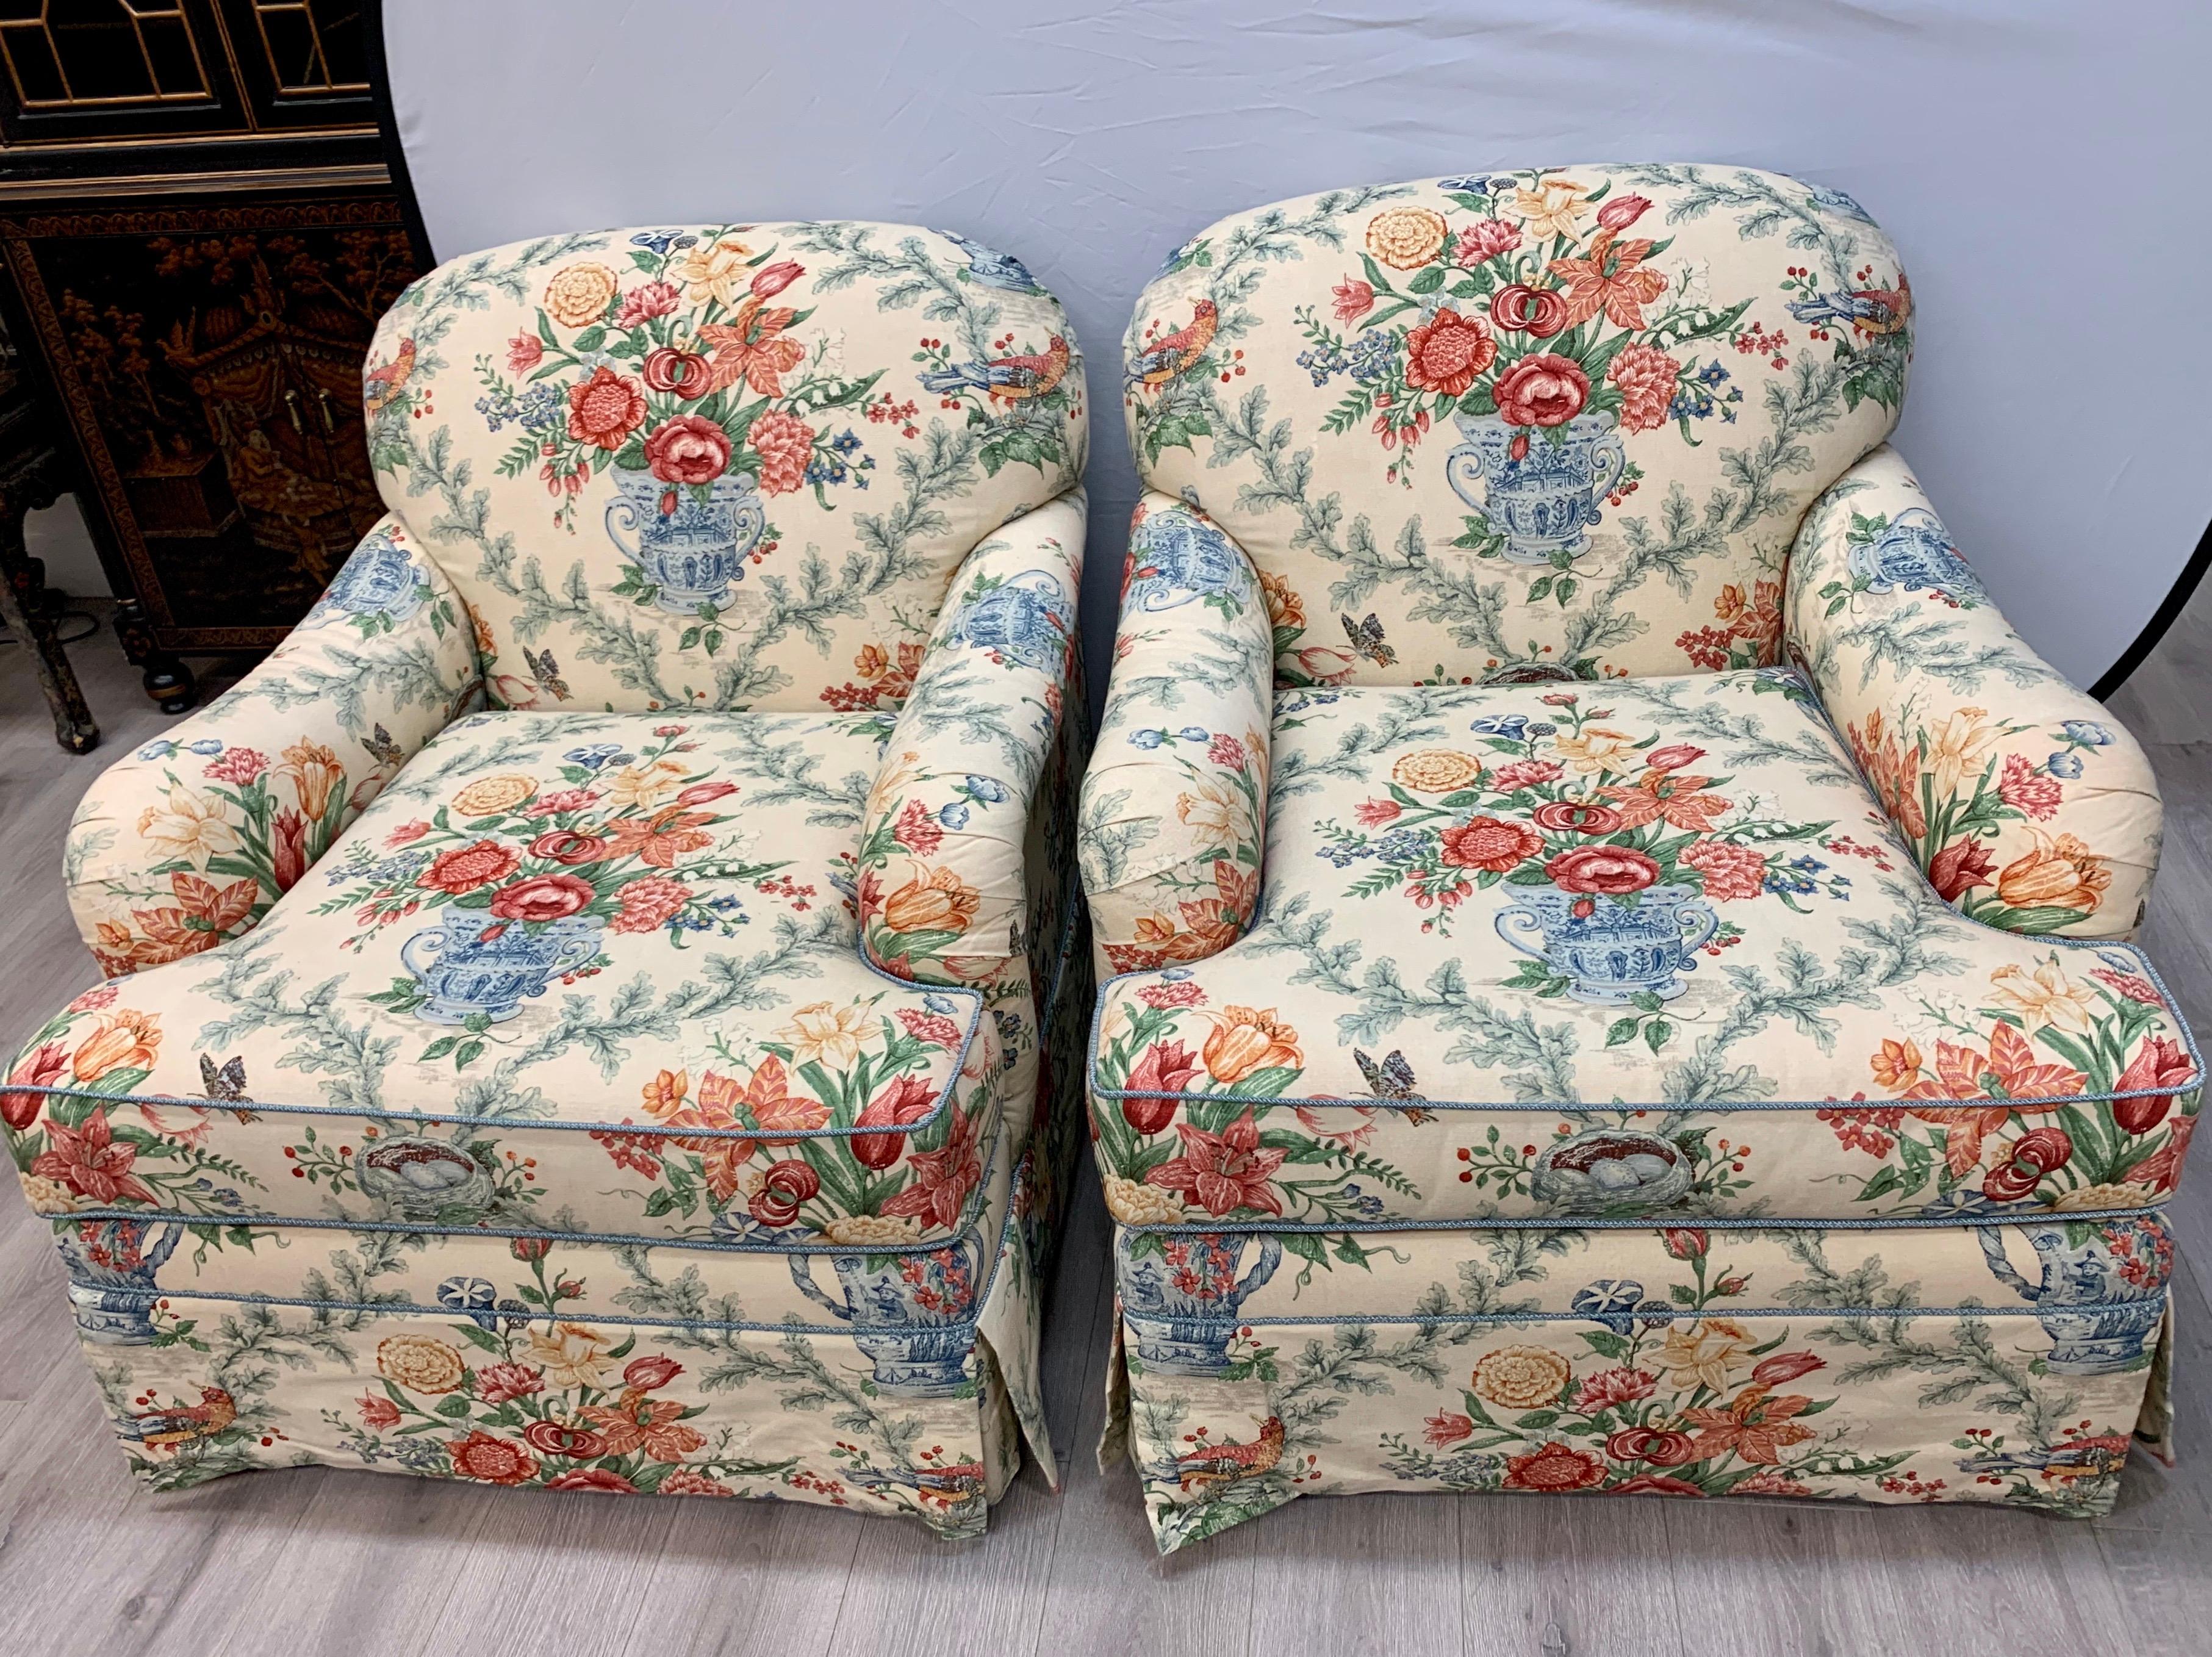 Big, colorful, pair of chintz club chairs with yellow being the base color. Guaranteed to brighten any
room. Feature eight way hand tied construction for the ultimate seating comfort. Now, more than ever, home is where the heart is.